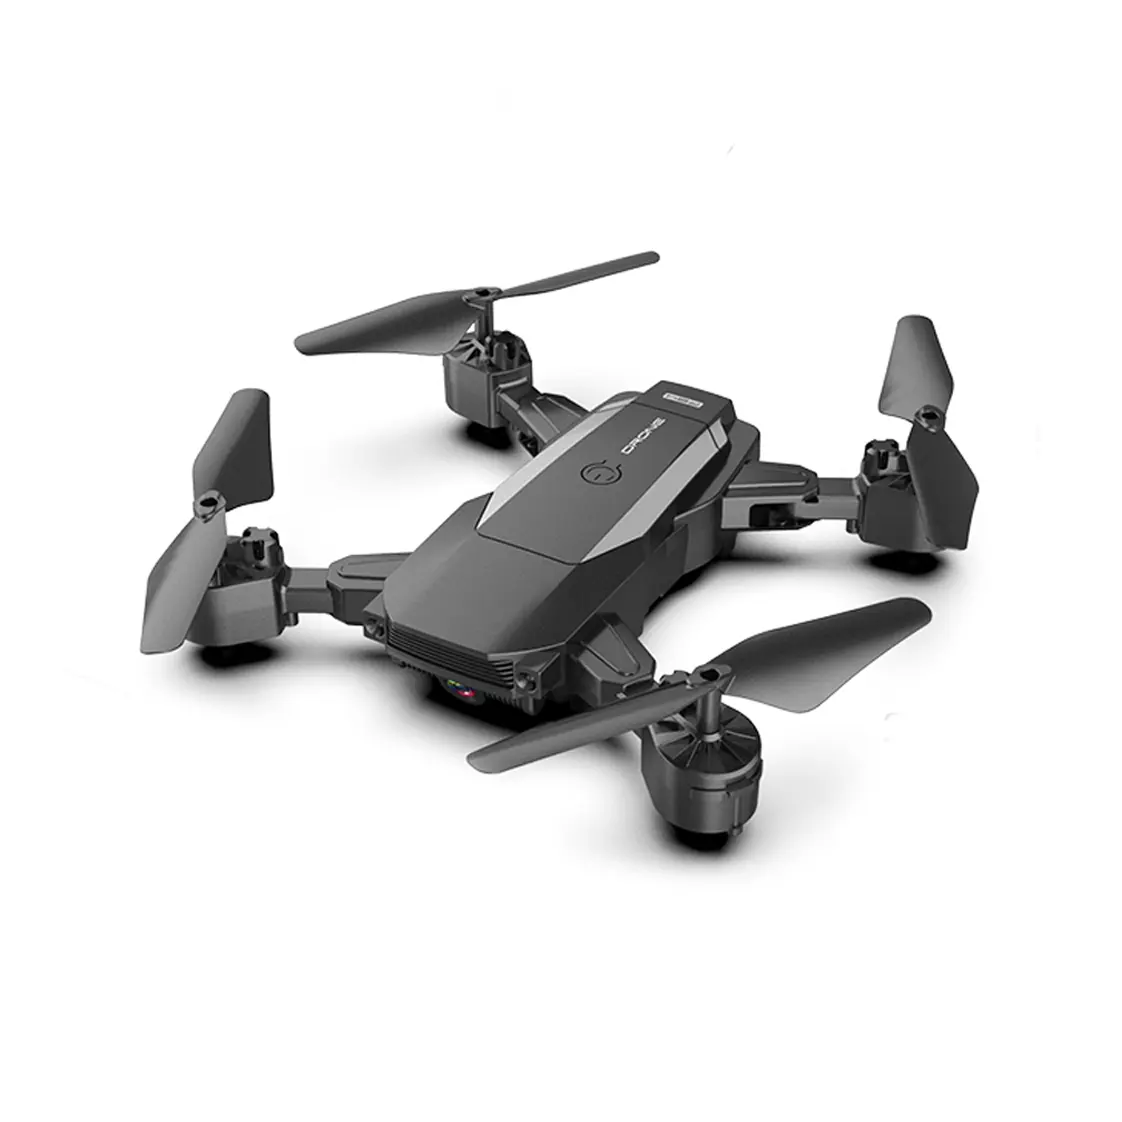 Spare Parts Drone Professional 4k With Camera Low Price